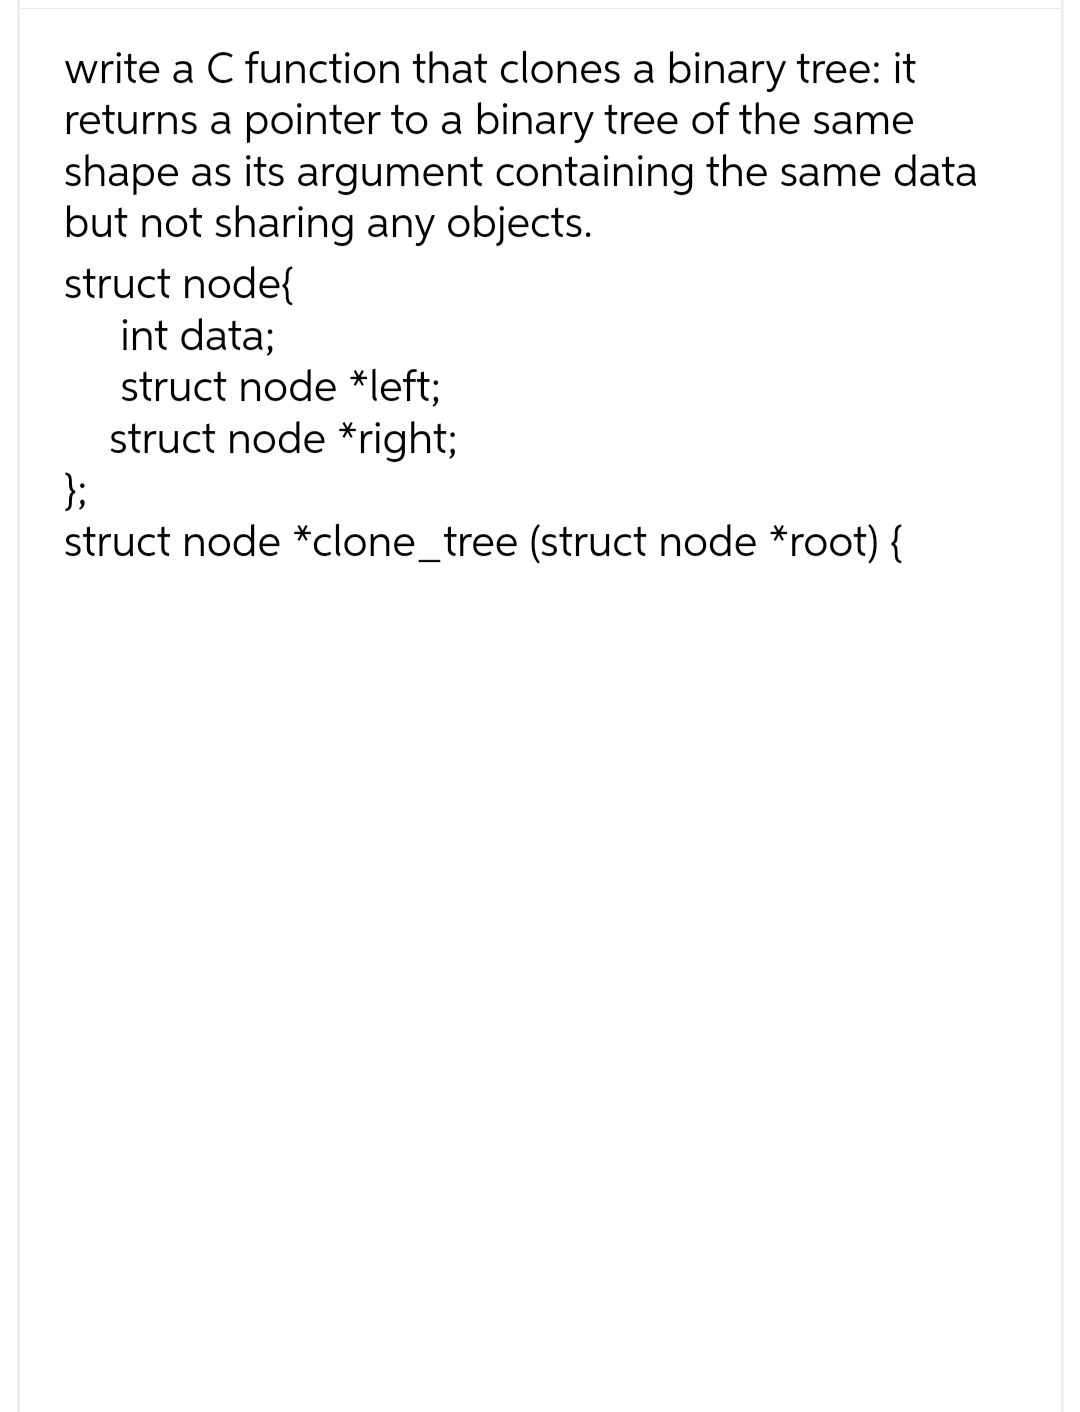 write a C function that clones a binary tree: it
returns a pointer to a binary tree of the same
shape as its argument containing the same data
but not sharing any objects.
struct node{
int data;
struct node *left;
struct node *right;
};
struct node *clone_tree (struct node *root) {